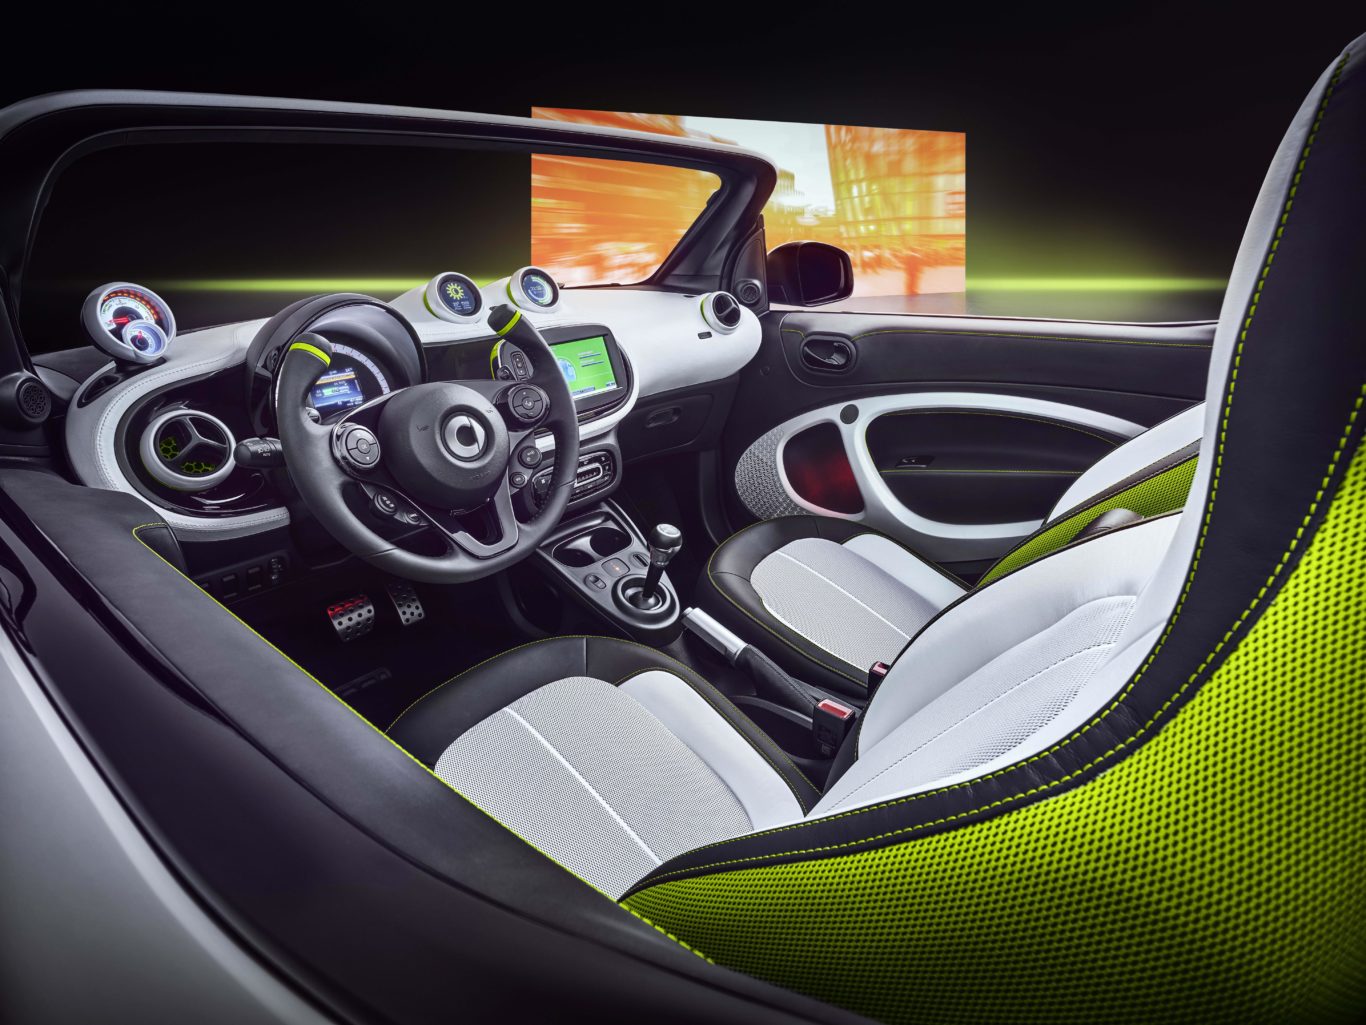 The interior of the Forease features a range of green accents